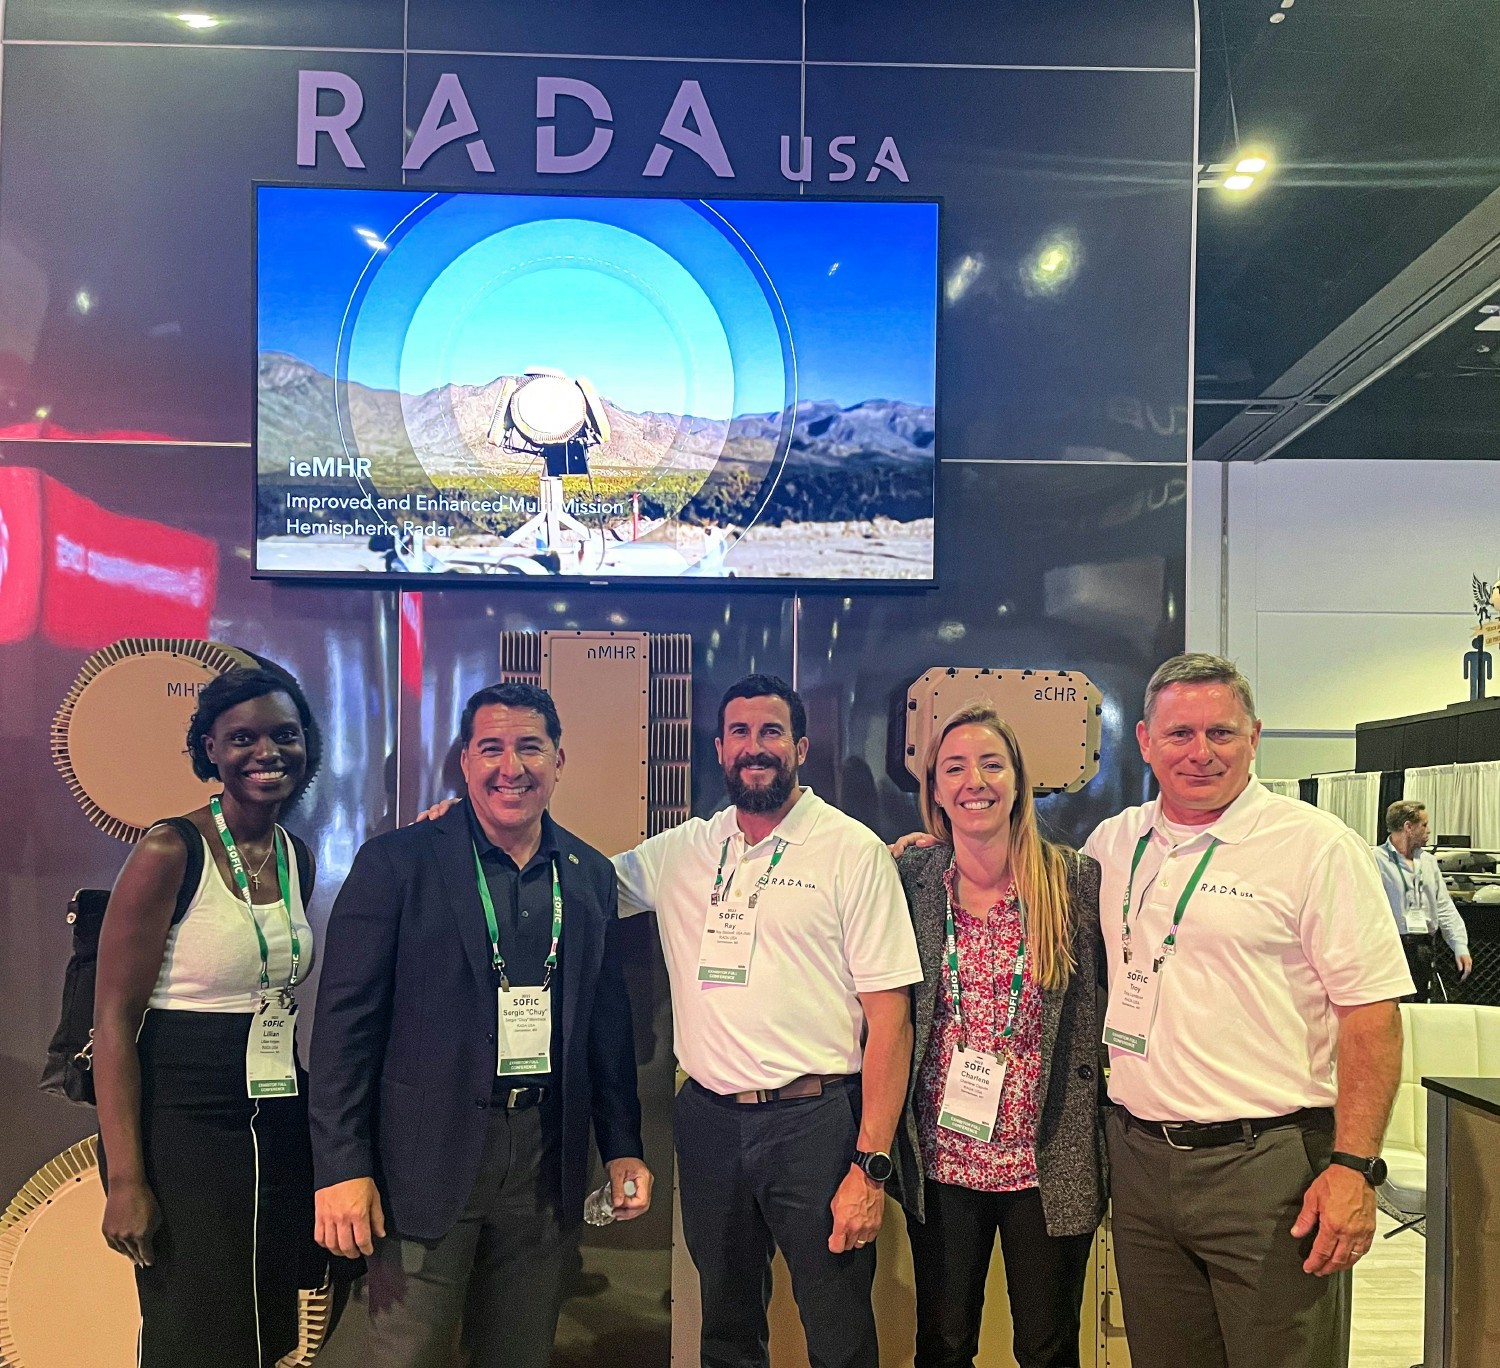 RADA USA BD & Marketing members ending the day at our exhibit at the SOFIC 2022